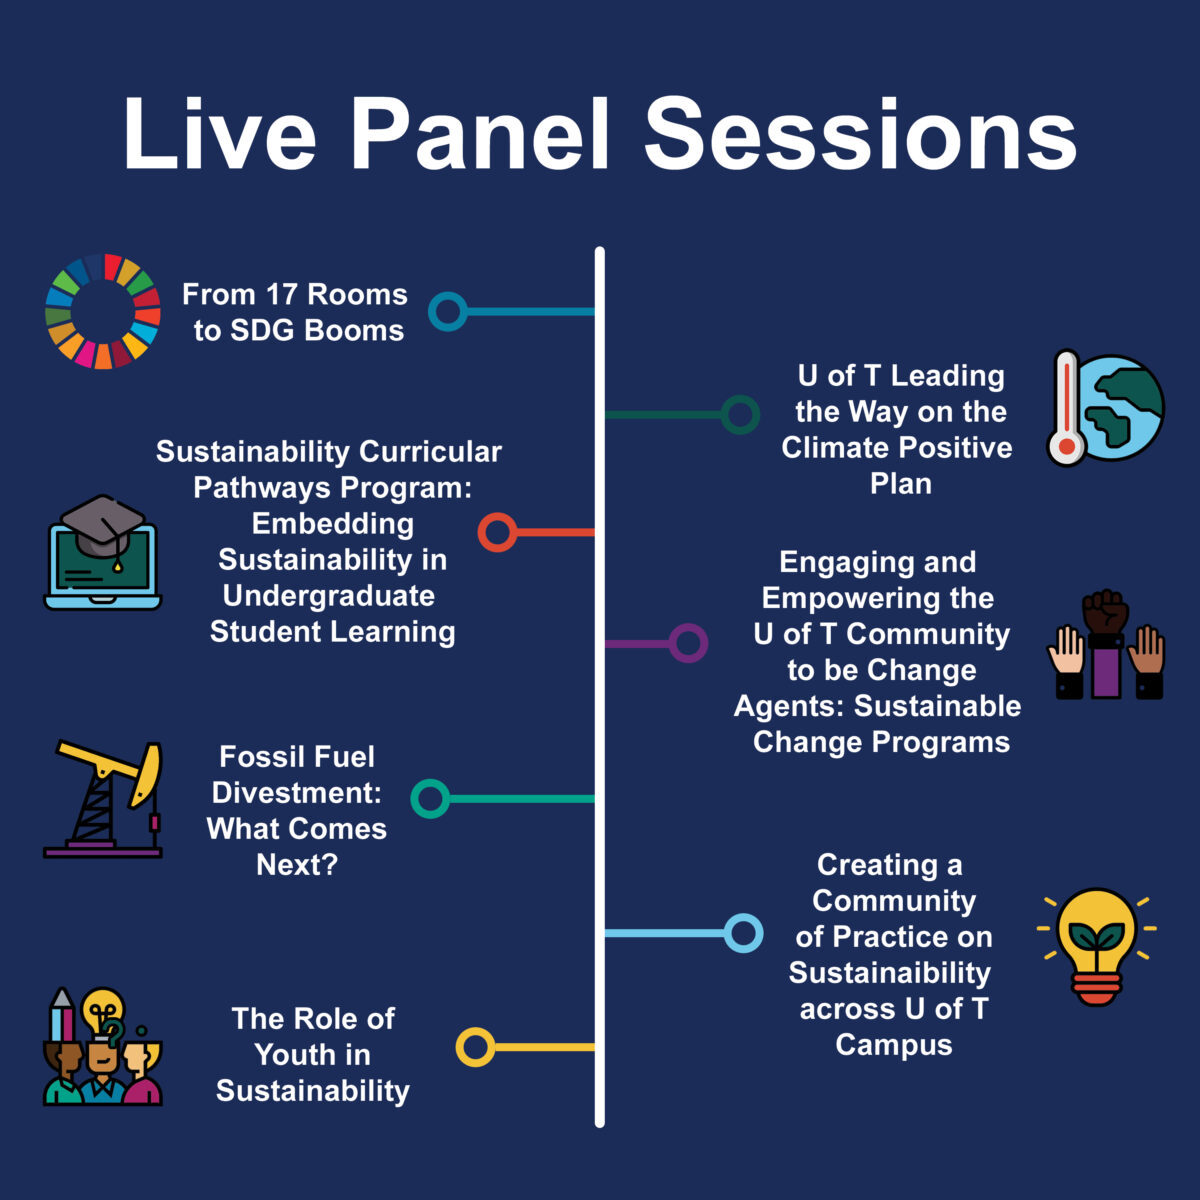 Live Panel Sessions info graphic, detailing the discussion topics of each of the seven panels held